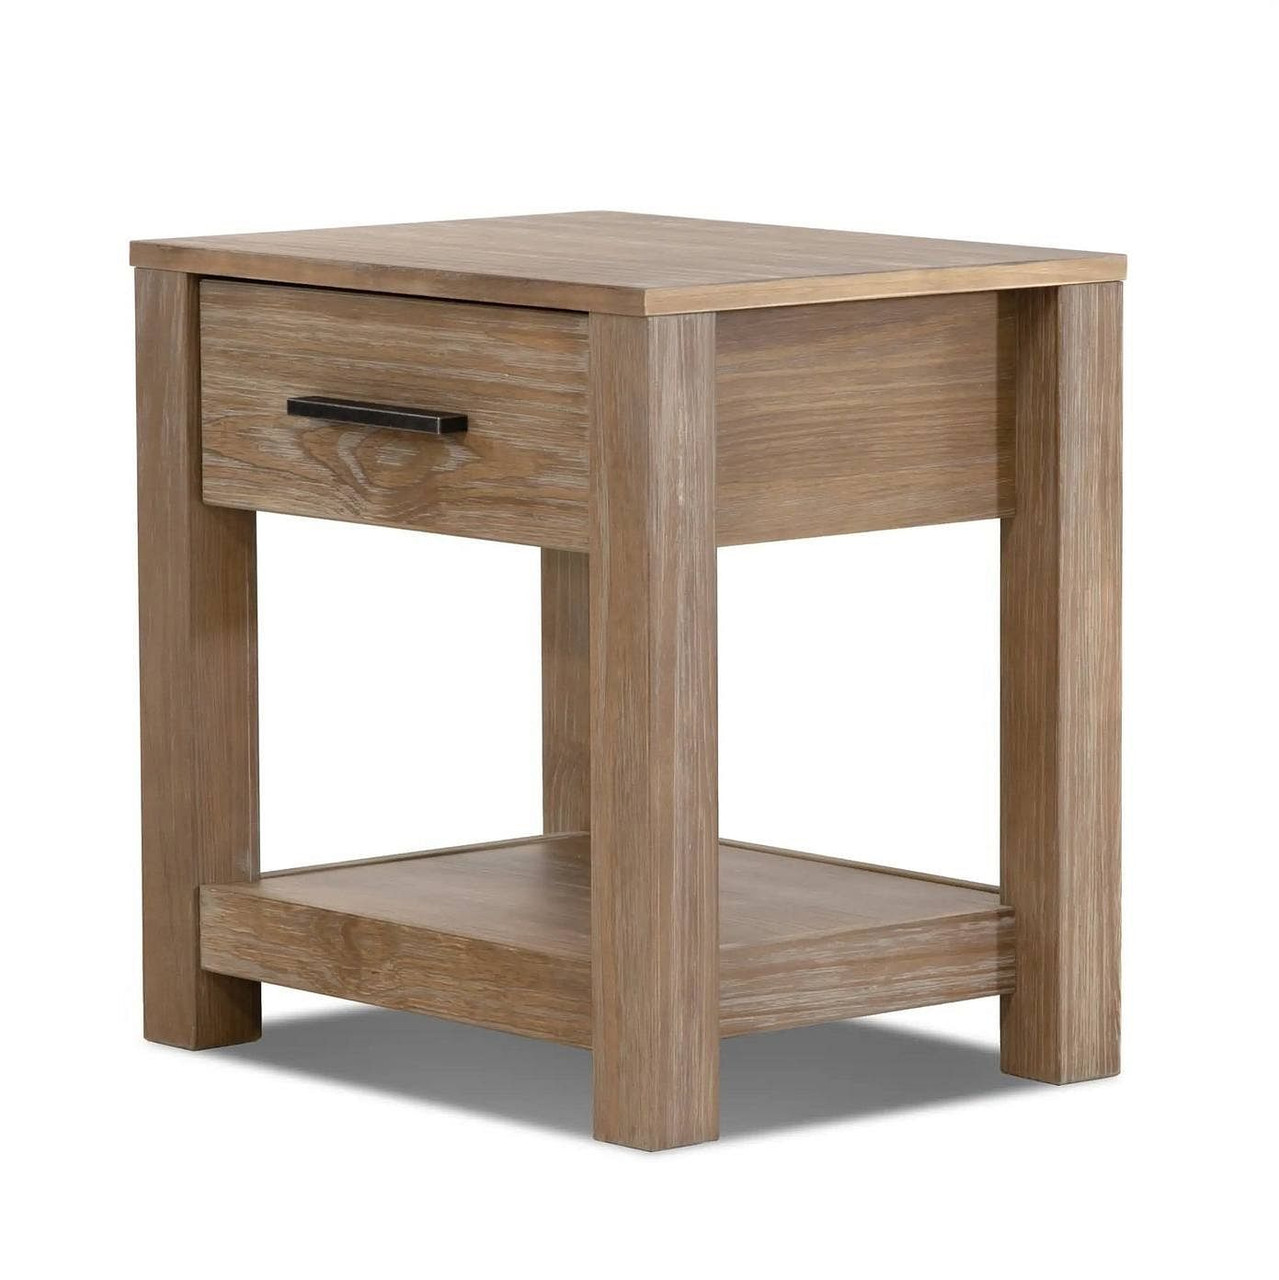 Farmhouse Traditional Rustic Pine Wood 1- Drawer Nightstand Bedside Table